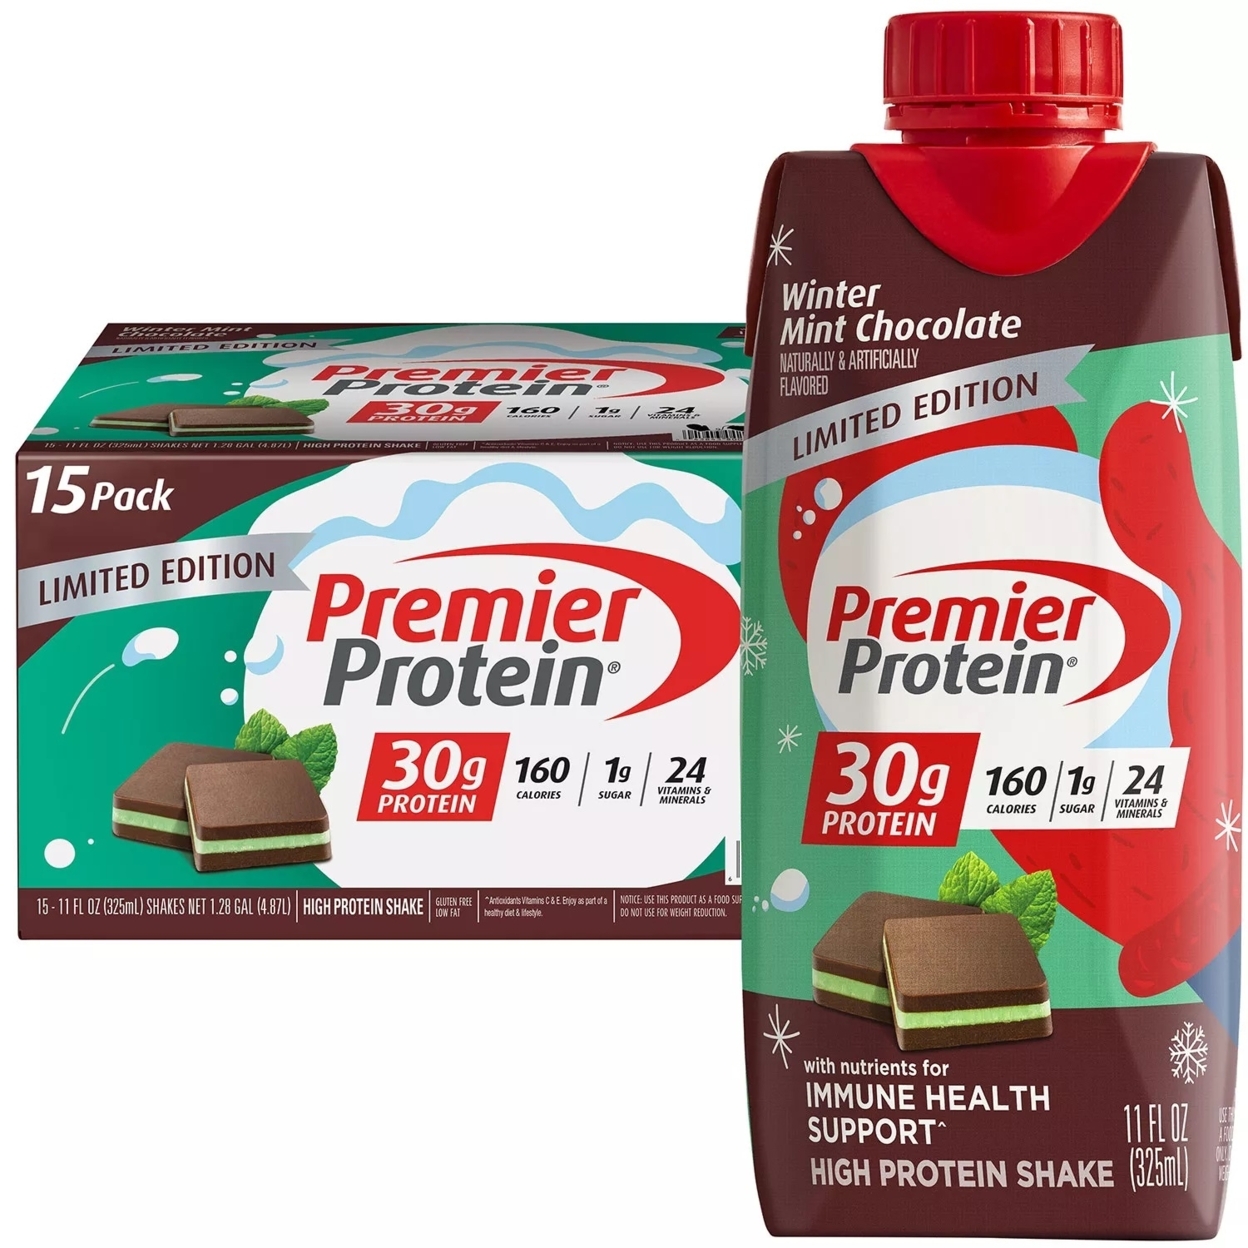 Premier Protein High Protein Shake, Winter Mint Chocolate, 11 Fl Oz (Pack Of 15)